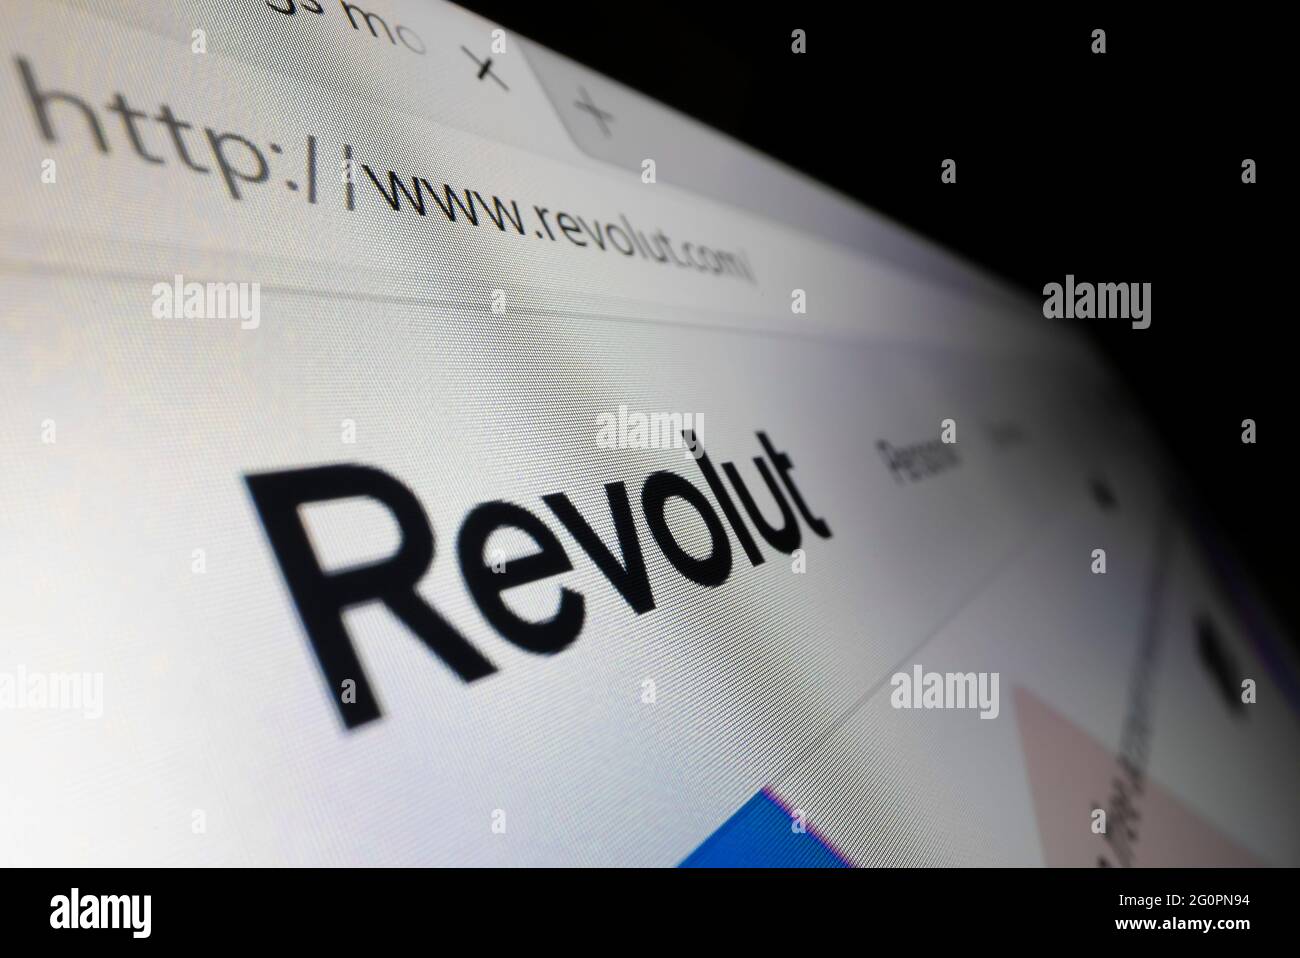 Close-up view of Revolut logo on its website Stock Photo